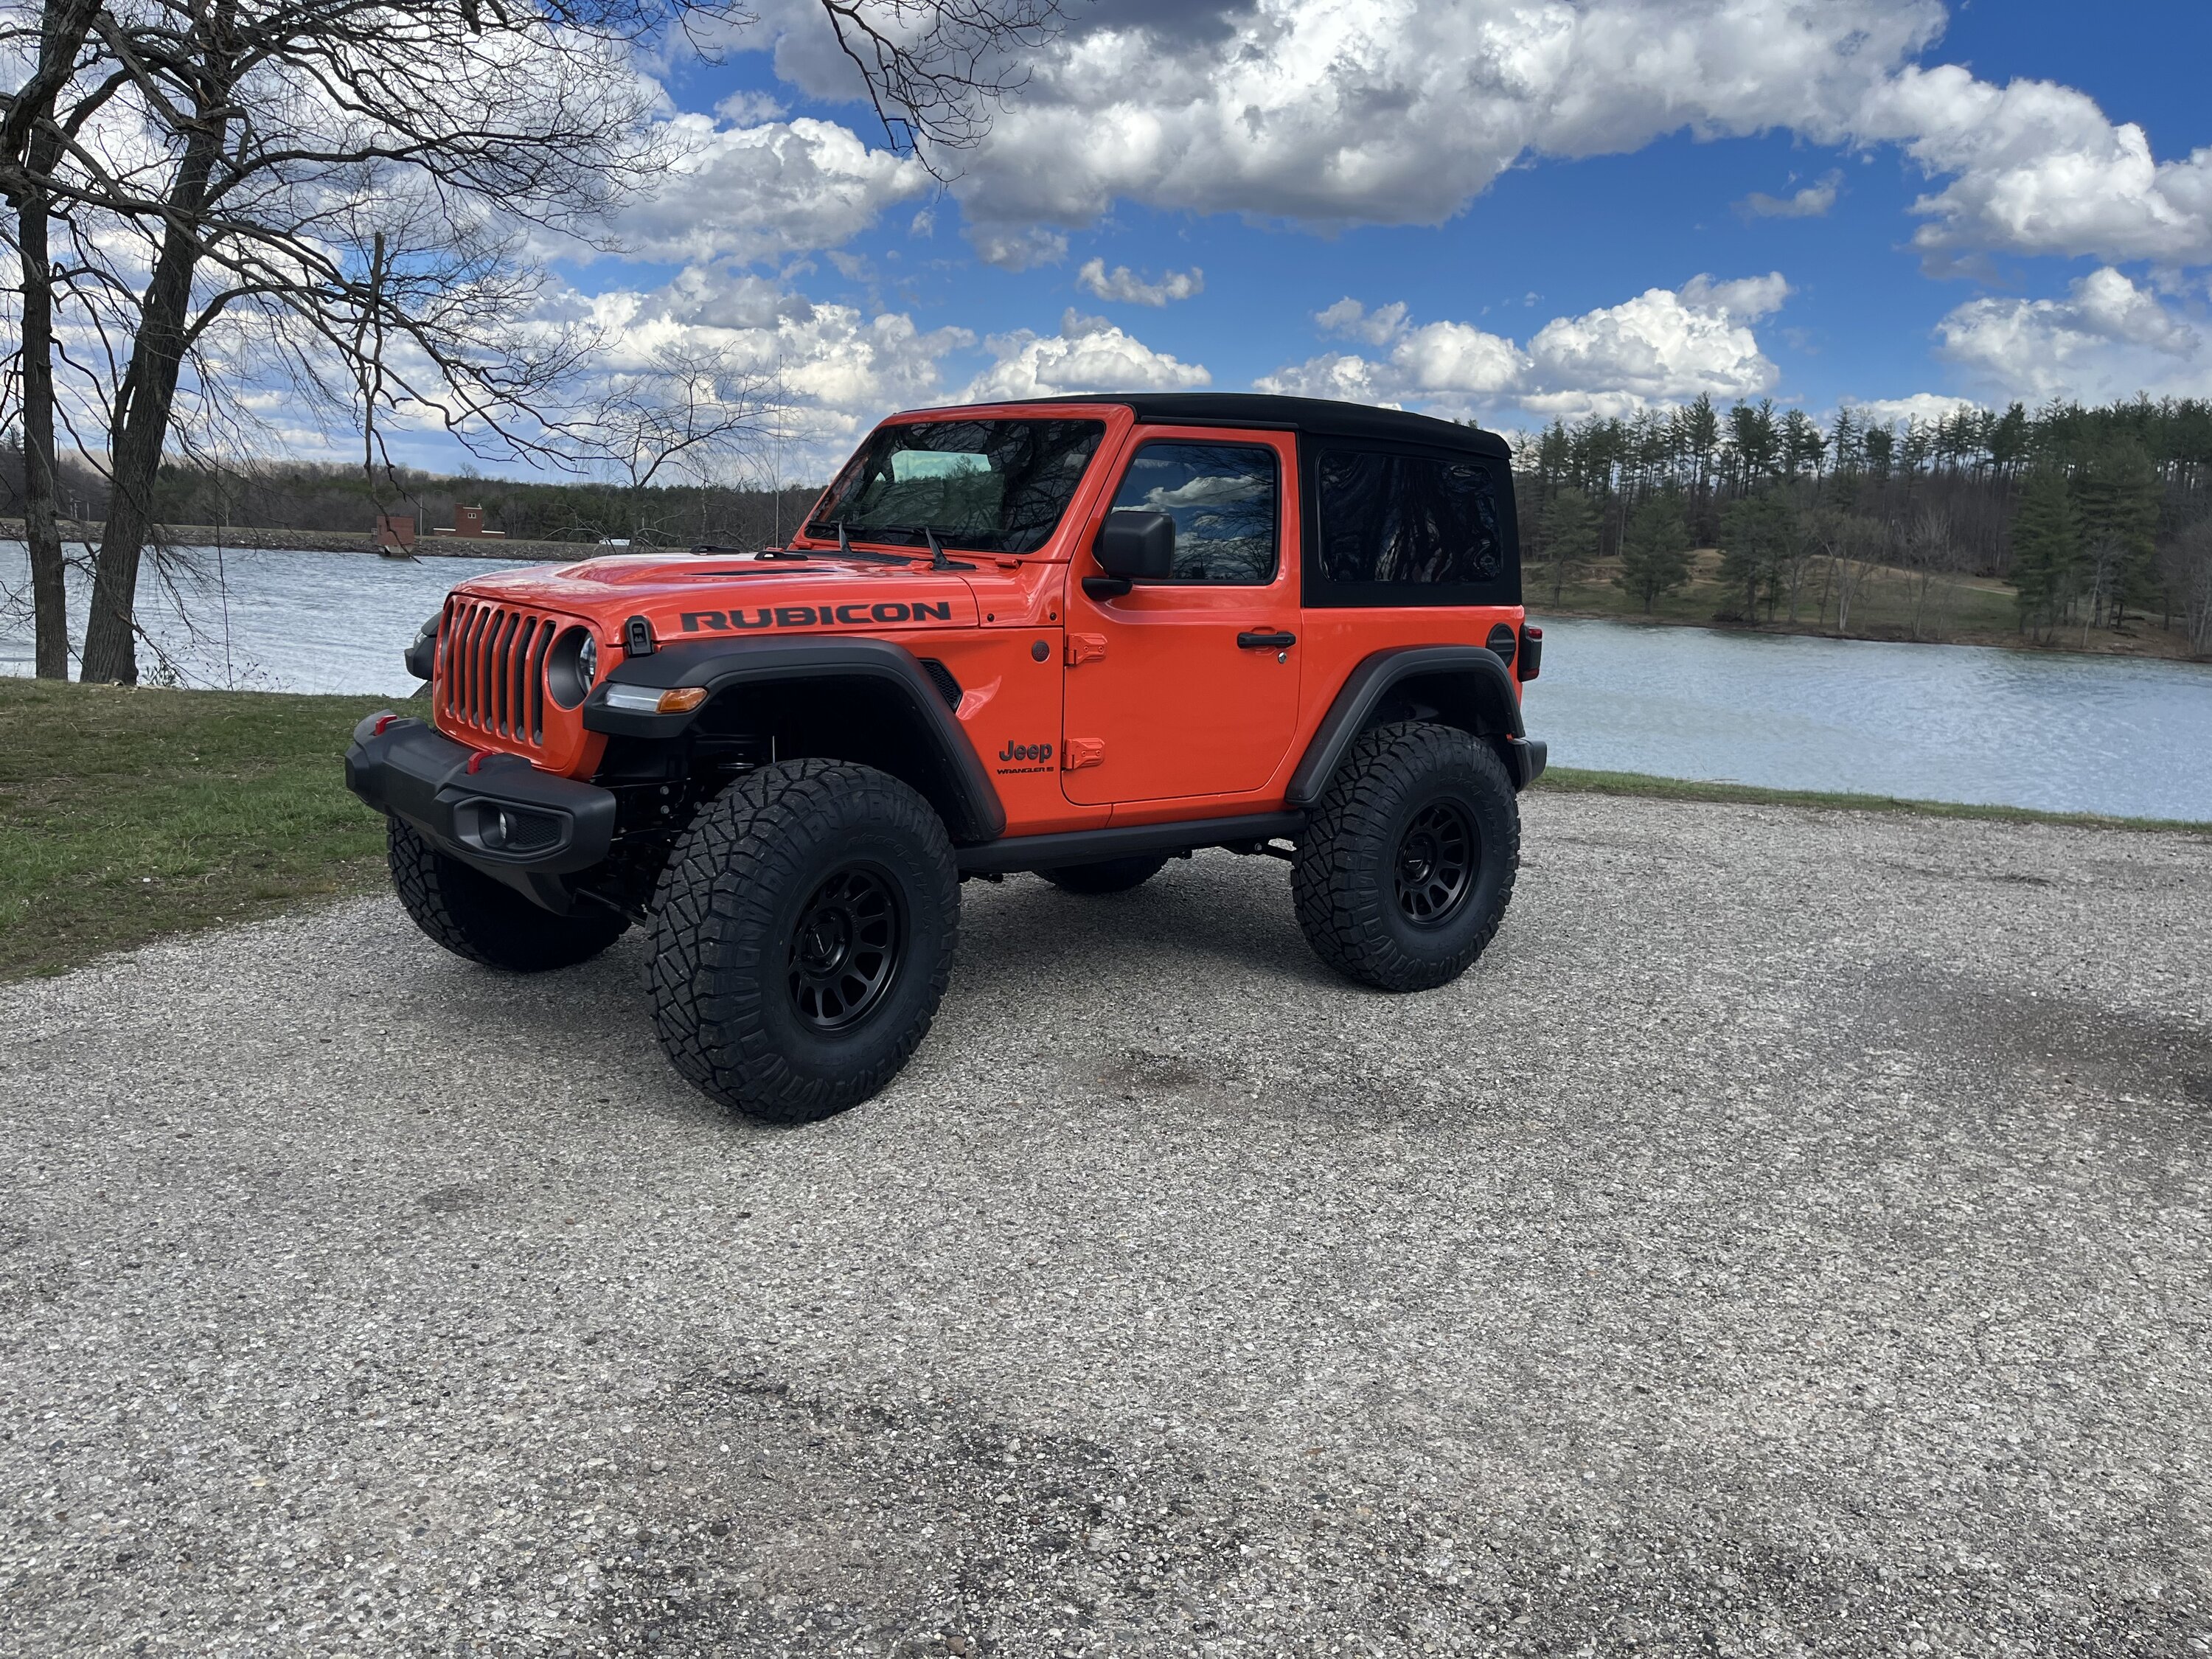 Jeep Wrangler JL Looking for pics of 2 door on 37's or larger with 17" wheels 93DF710B-8E46-422E-B76B-0620E742D240